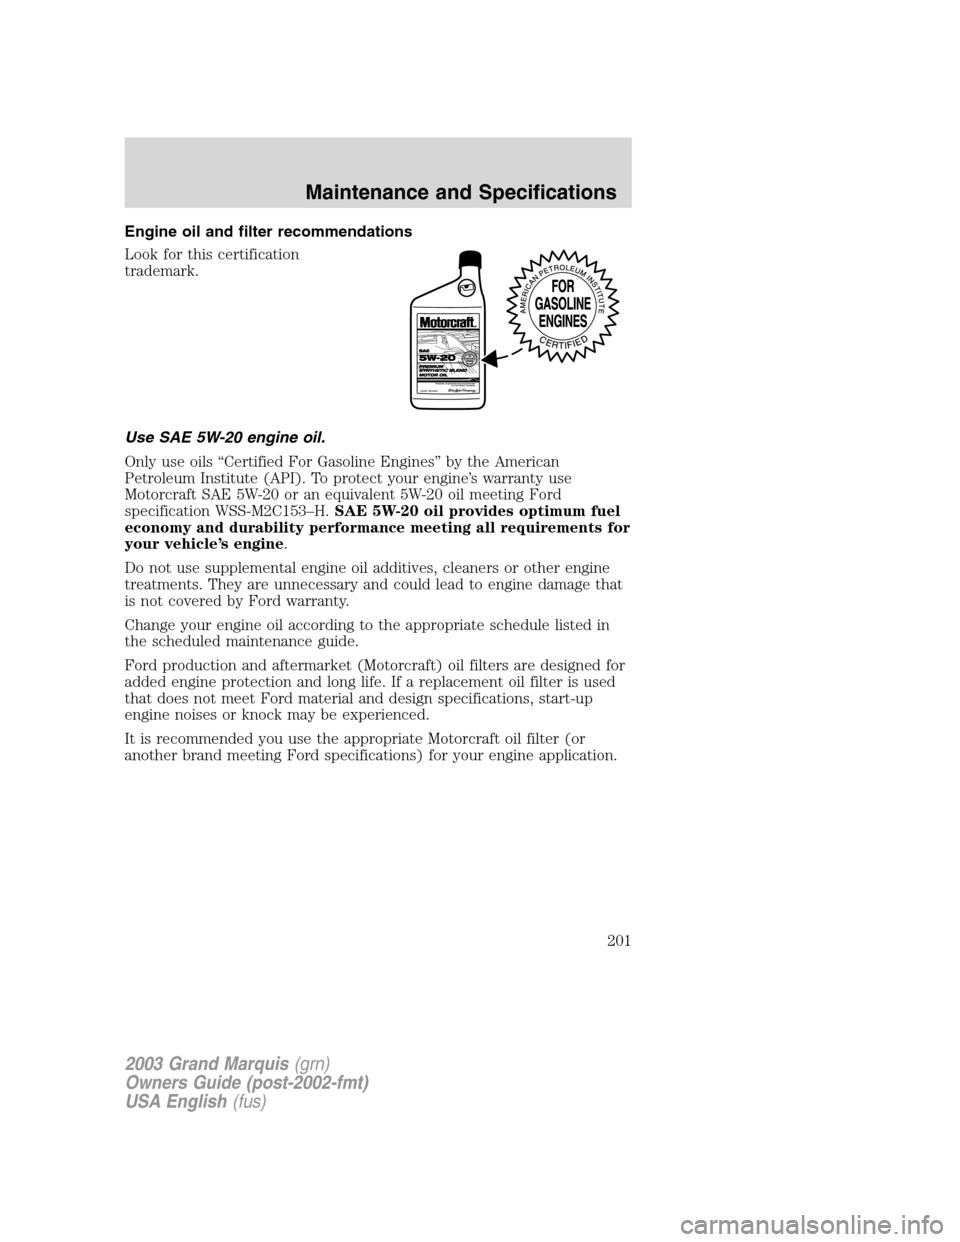 Mercury Grand Marquis 2003  s Owners Guide Engine oil and filter recommendations
Look for this certification
trademark.
Use SAE 5W-20 engine oil.
Only use oils “Certified For Gasoline Engines” by the American
Petroleum Institute (API). To 